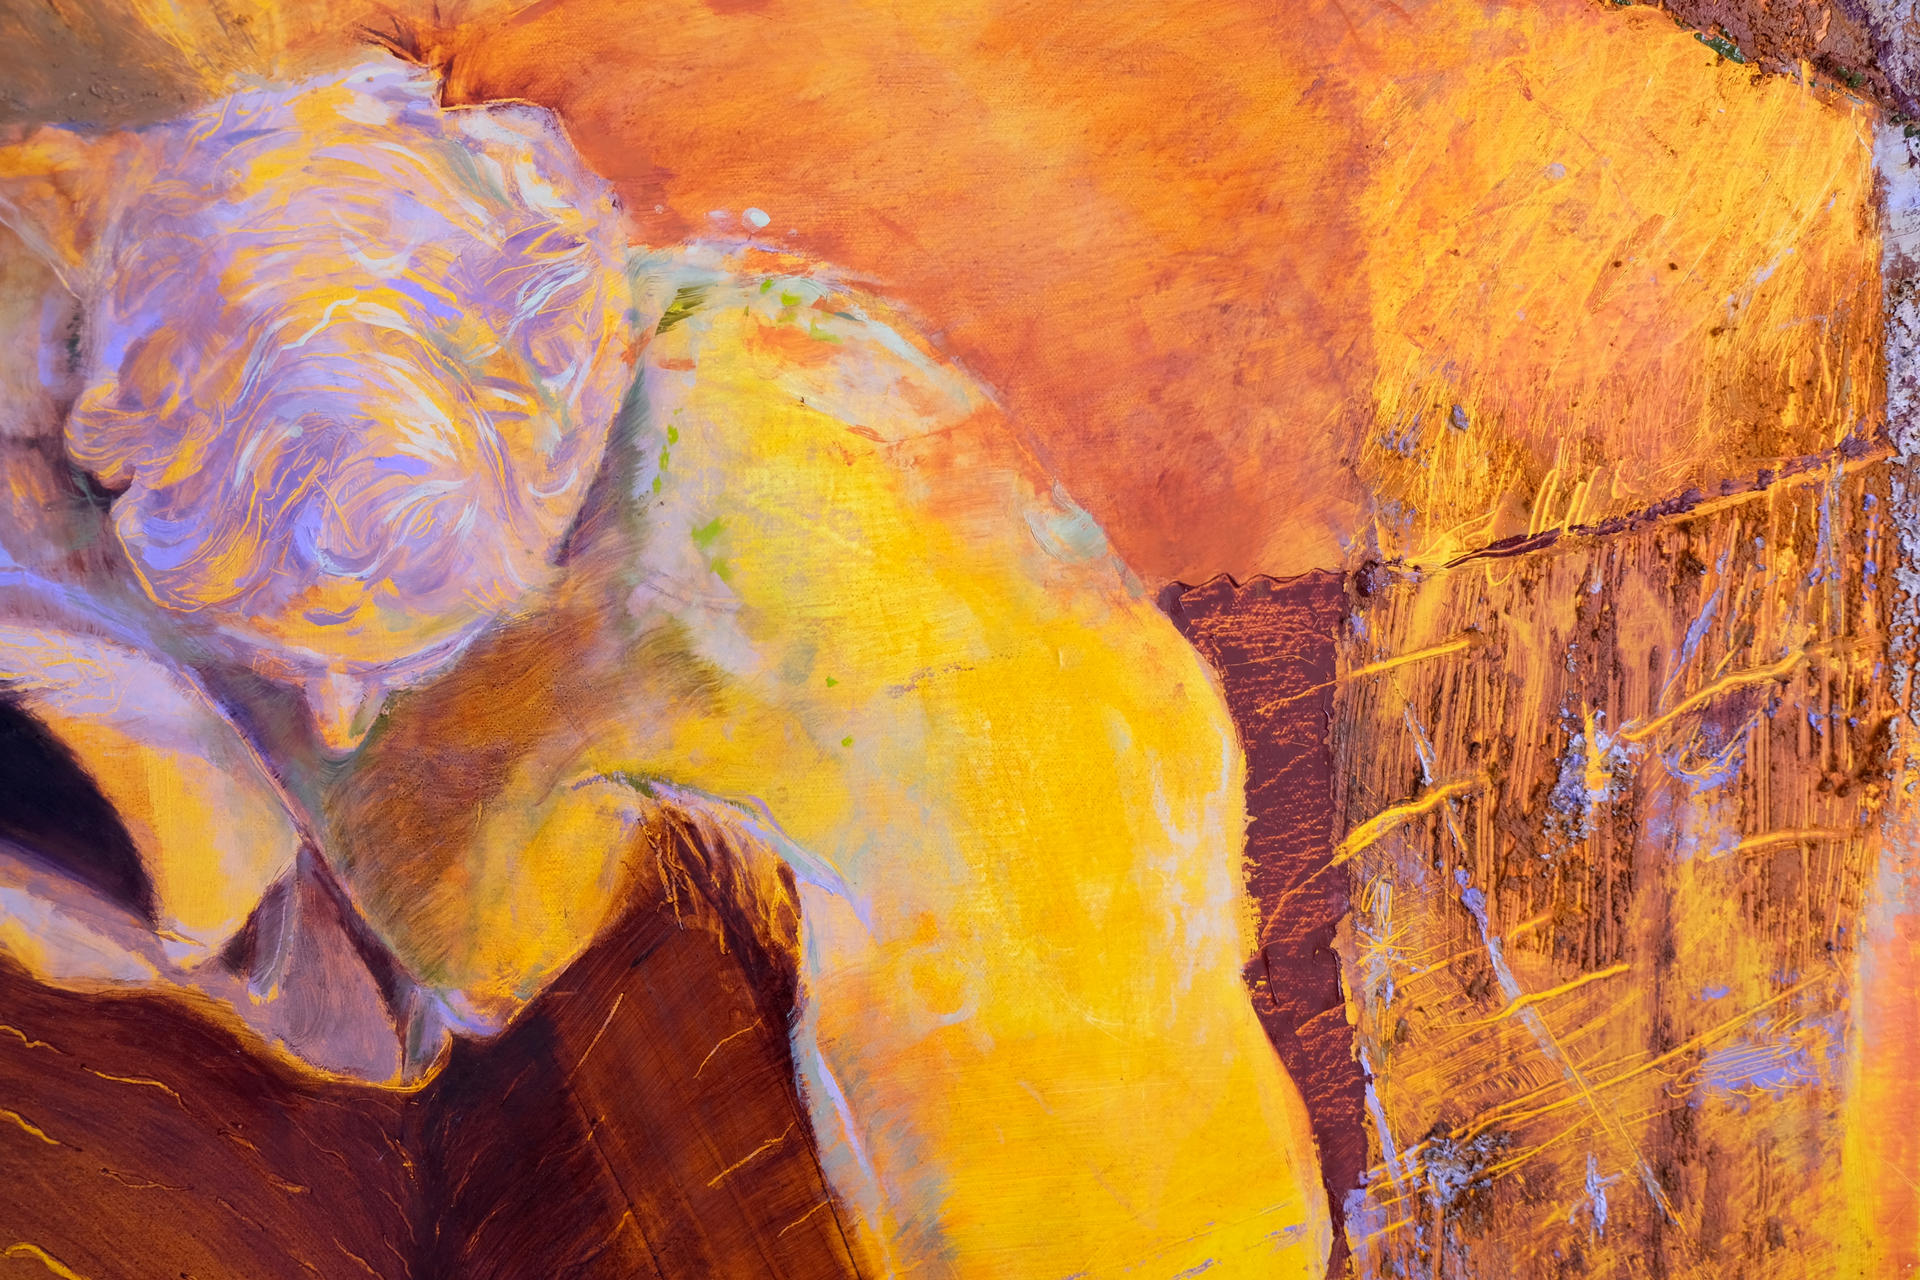 Photo of a detail of a yellow and purple painting. You can see the aerial view of a figure with muscular arms standing on an edge and varying textures.